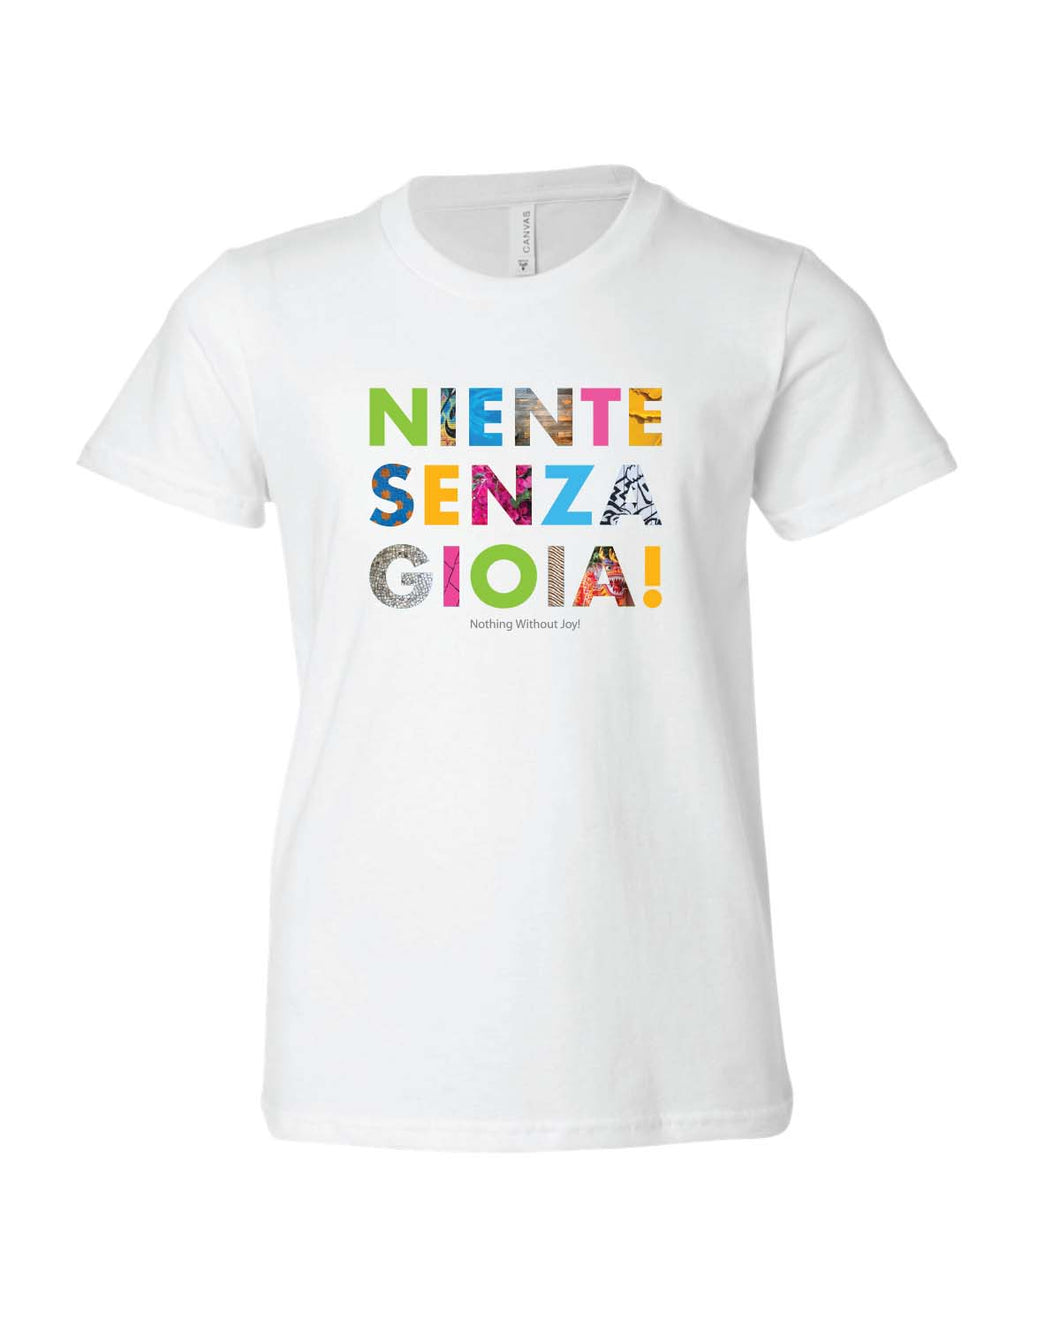 Youth Niente Senza Gioia Tee *new*